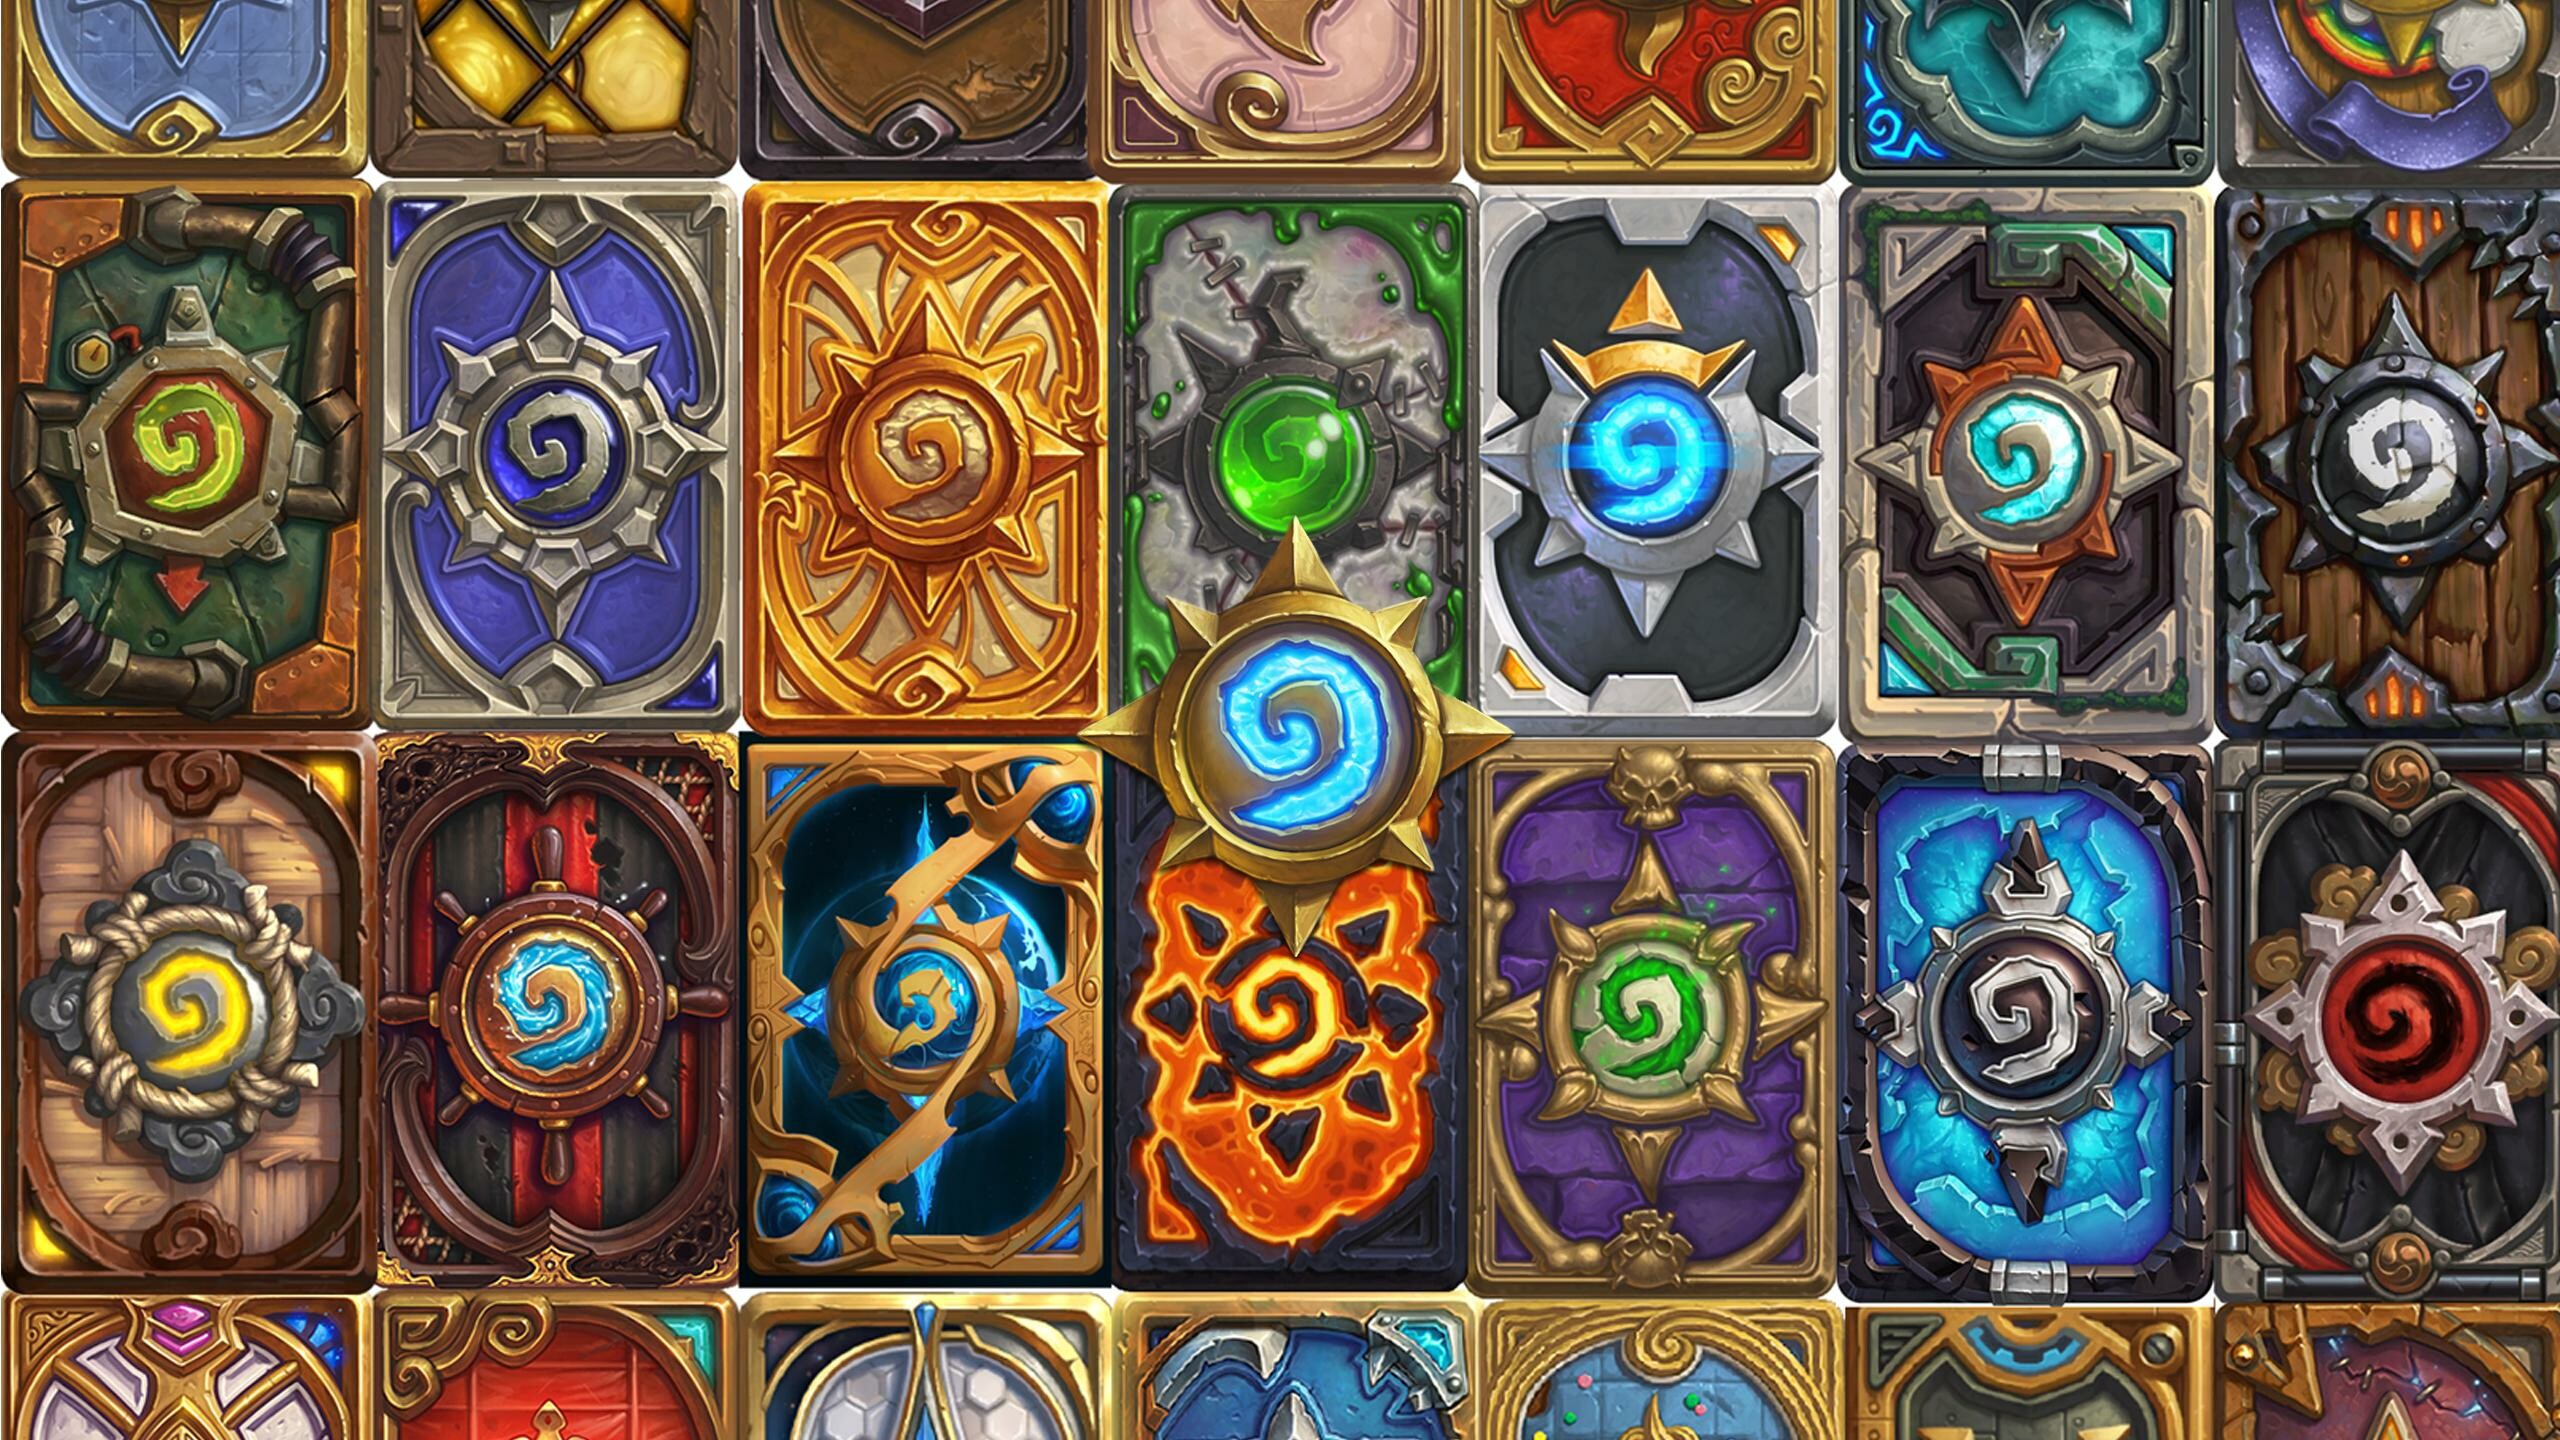 Hearthstone: A free-to-play, digital card game set in the Warcraft universe. 2560x1440 HD Wallpaper.